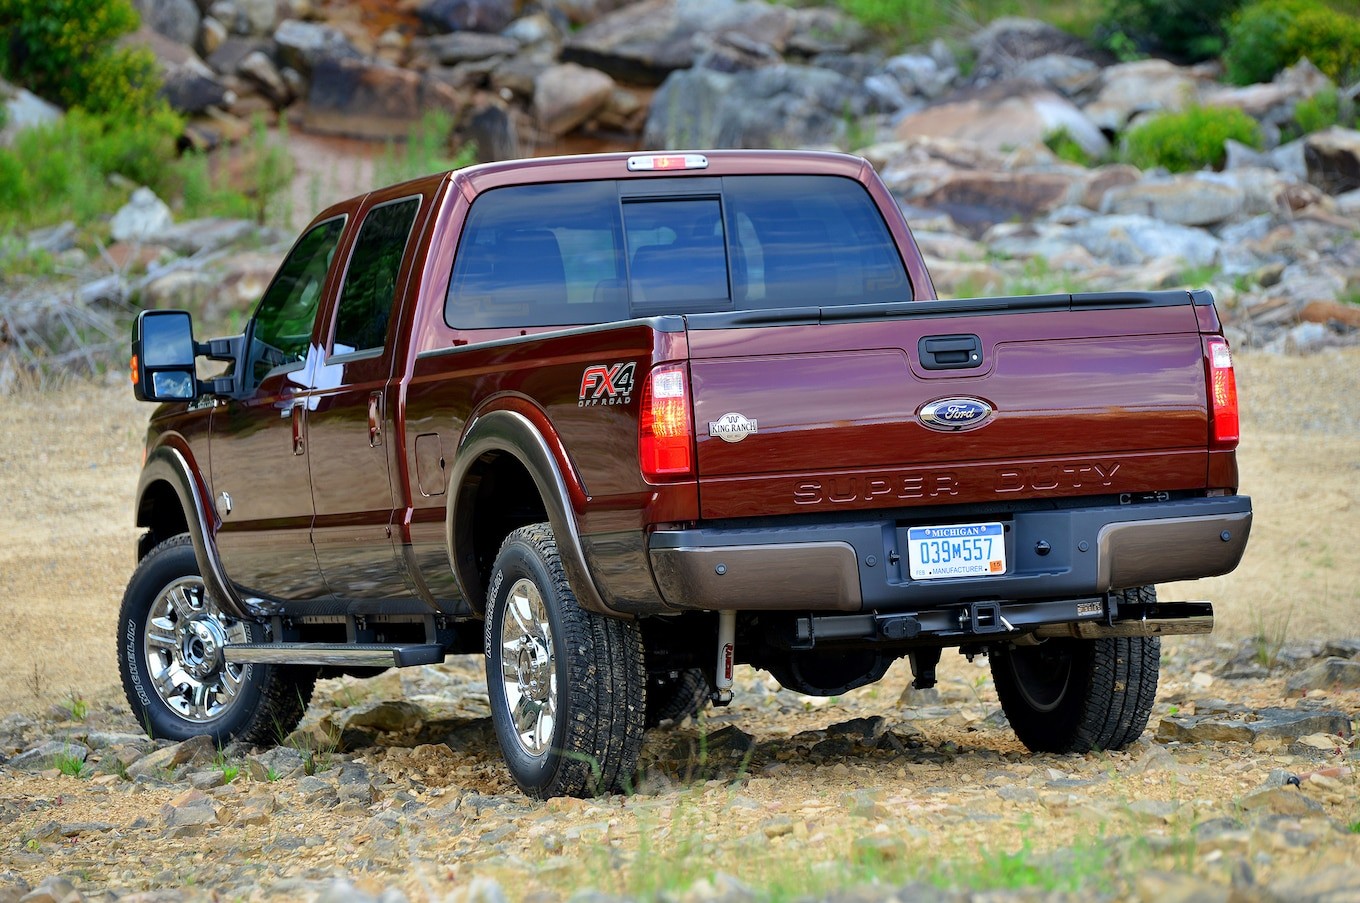 2015 FORD F-250